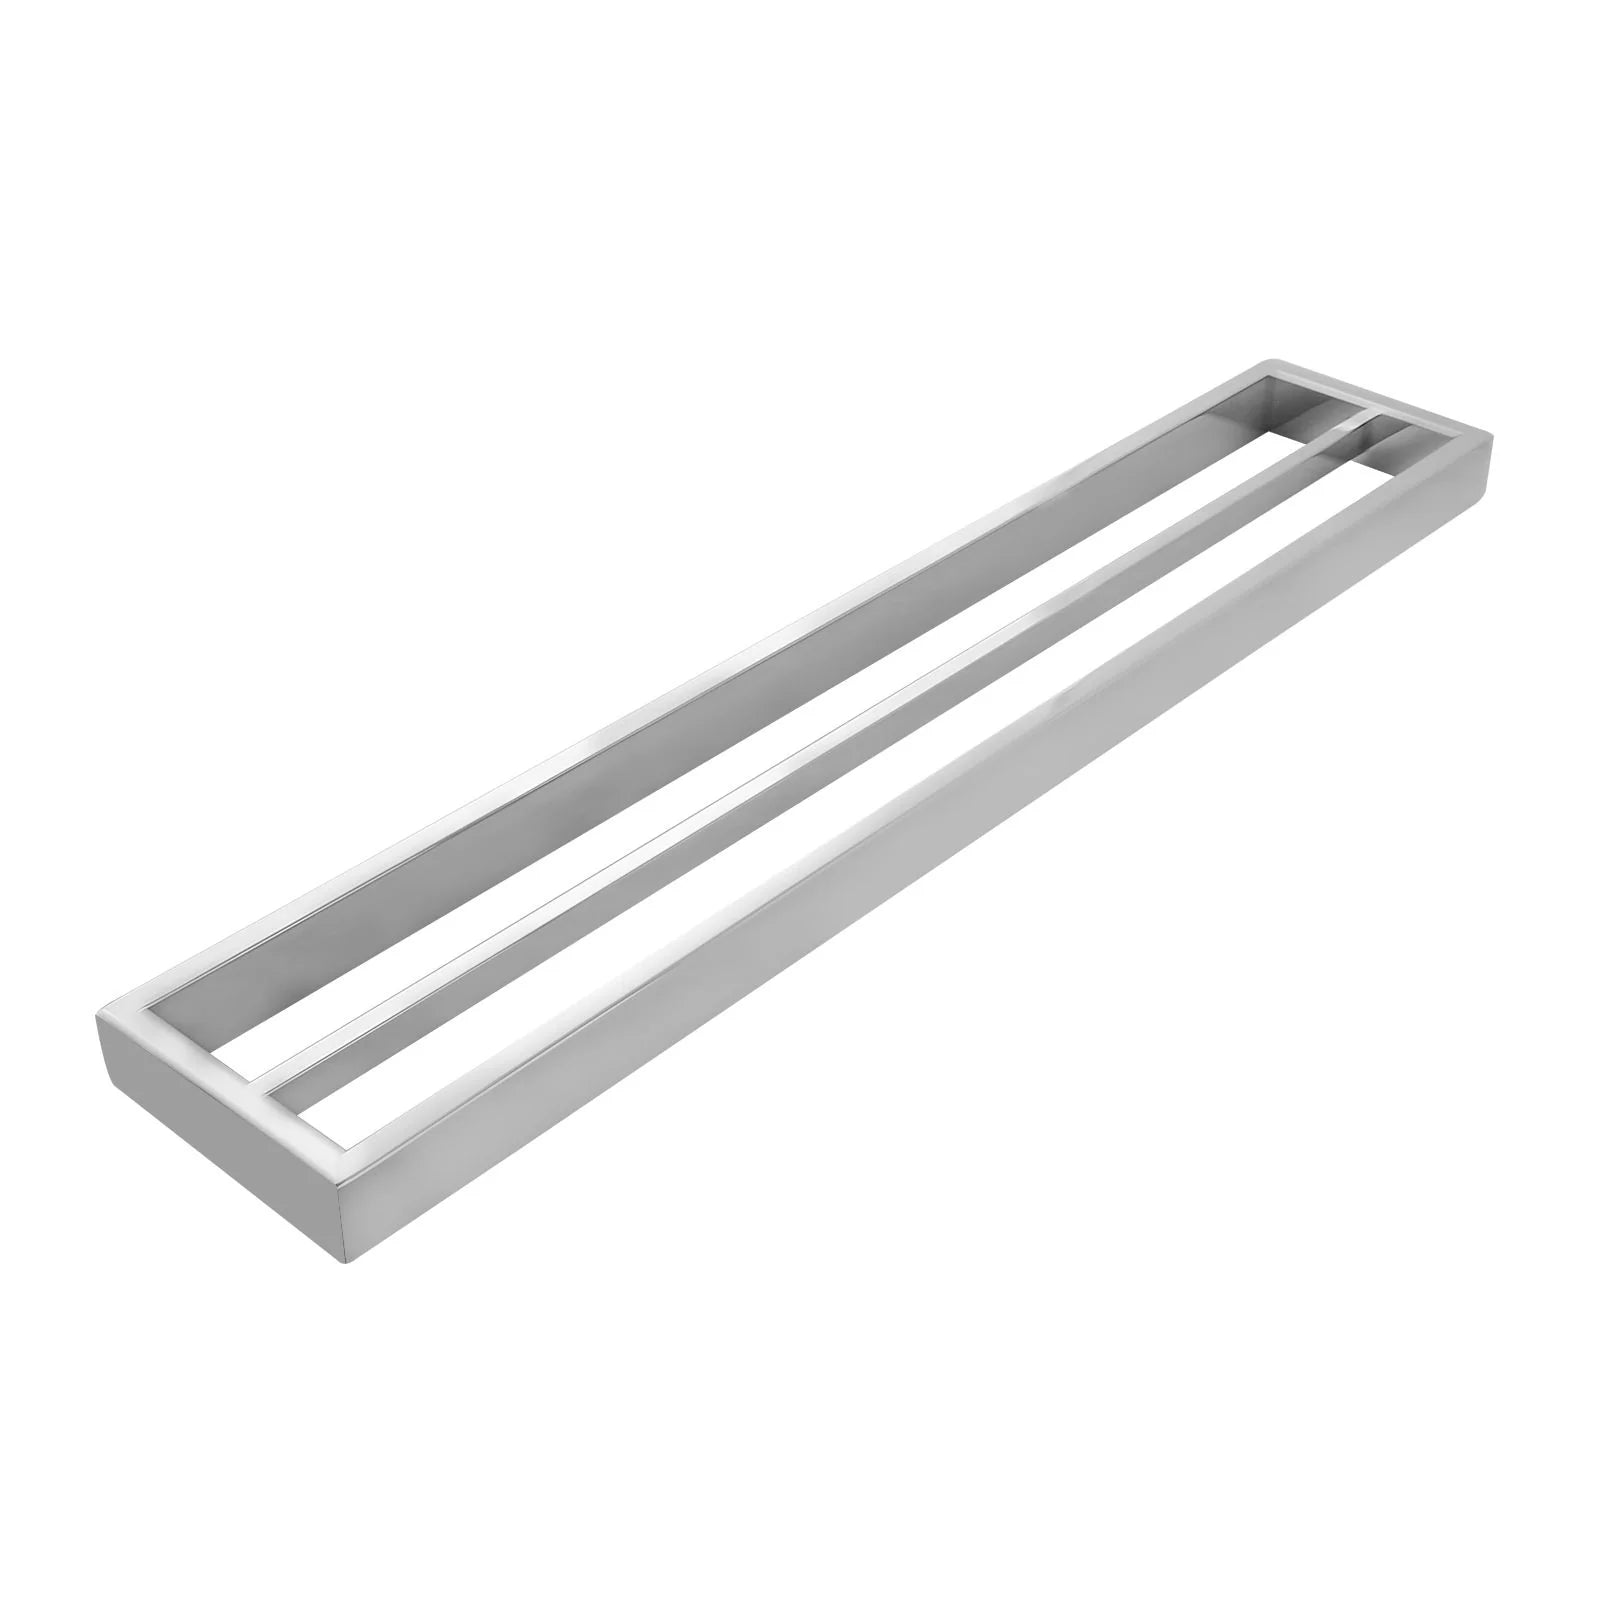 Ivano Series Double Towel Rail: Dual Bars for Ample Towel Storage-600MM-Chrome-CH6402-TR, 2